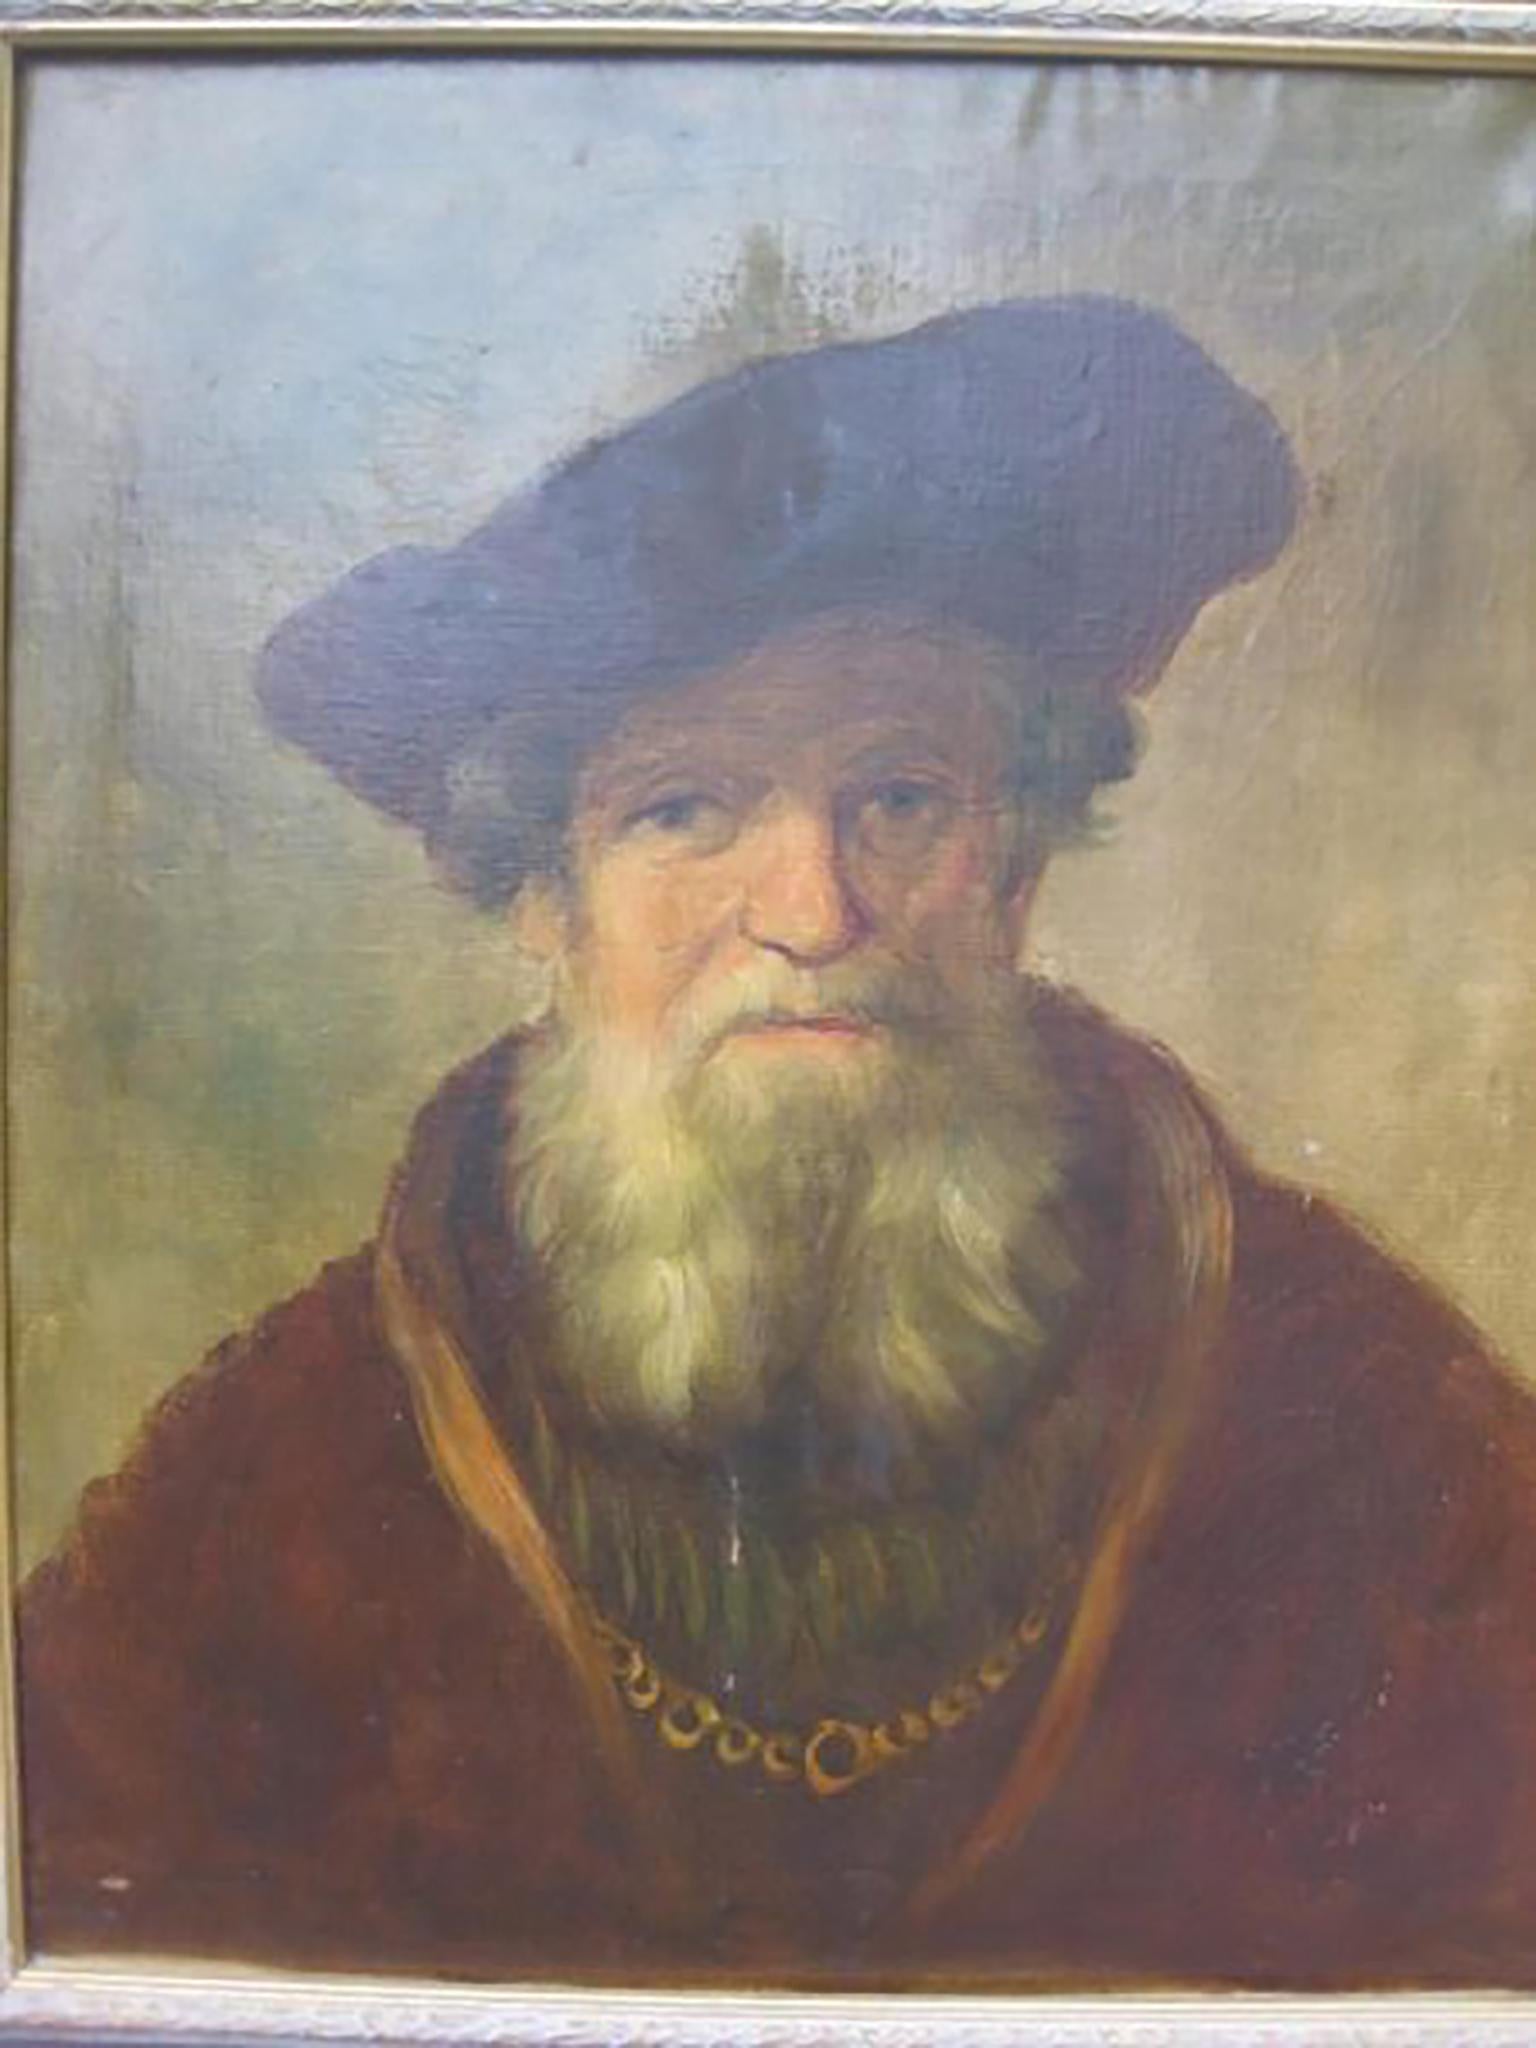 Exceptional Oil Painting attributed to the School of Rembrandt  Titled: Old man with beard and beret  Frame is modern, not original  Media: Oil on canvas (relined)  The painting is signed in the right lower corner in red paint, although signature is